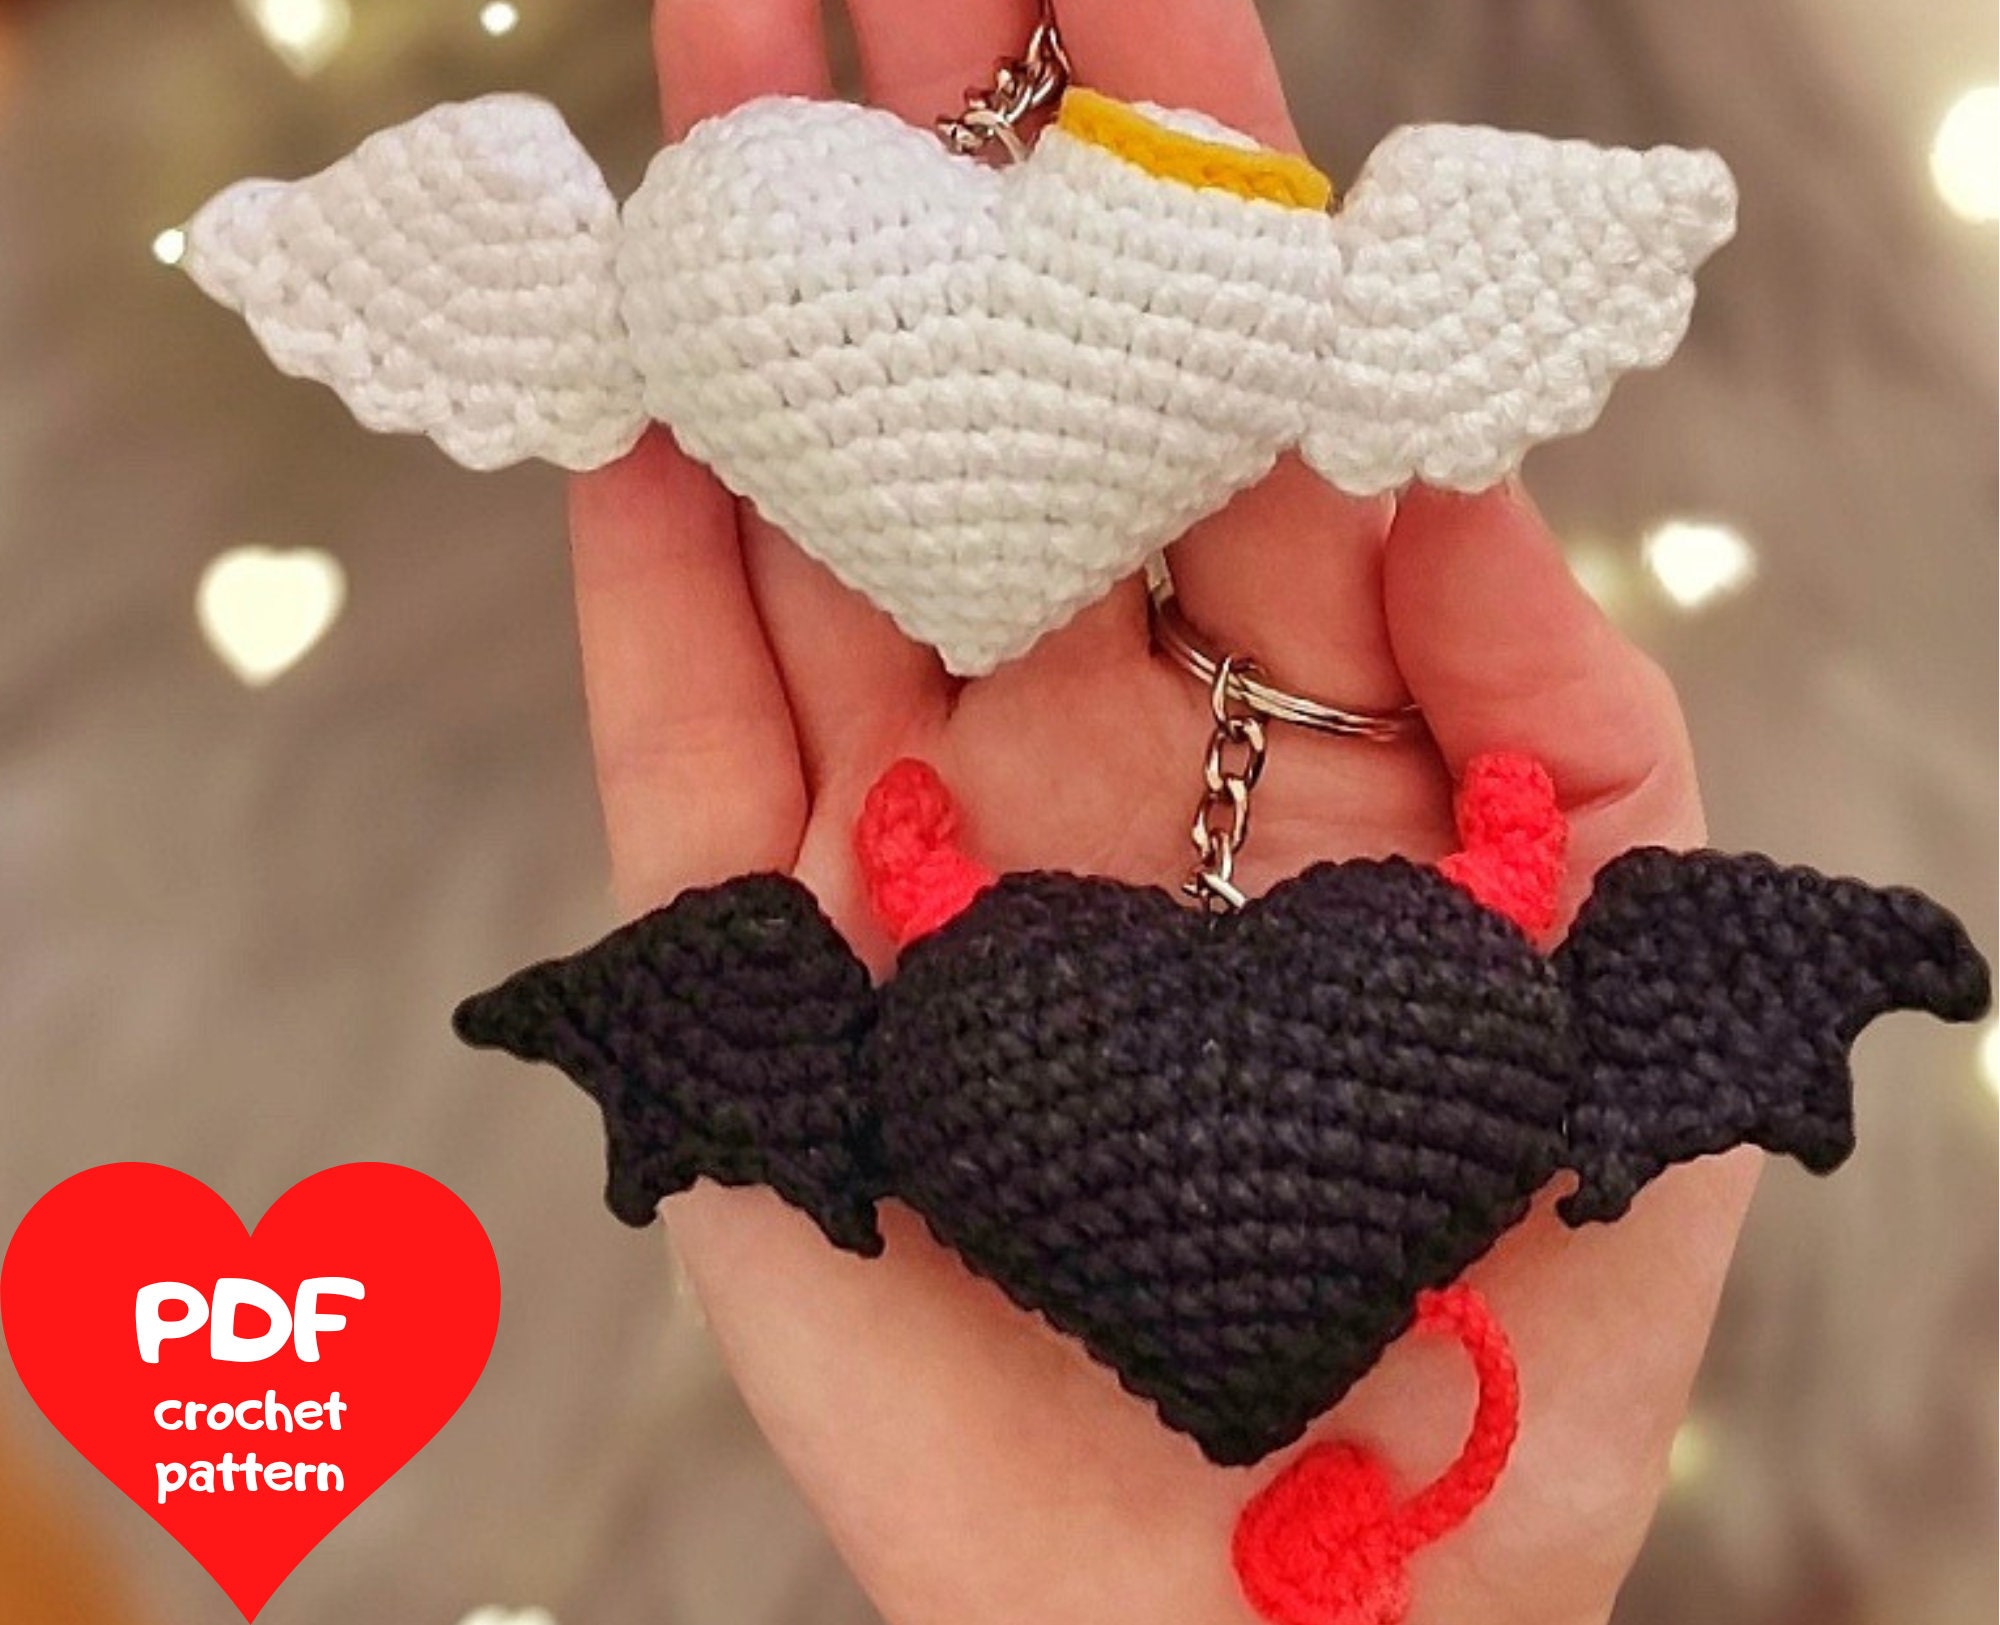 27 Quick and Cute Patterns: Free Crochet Keychain Patterns You'll Love -  Easy Crochet Patterns